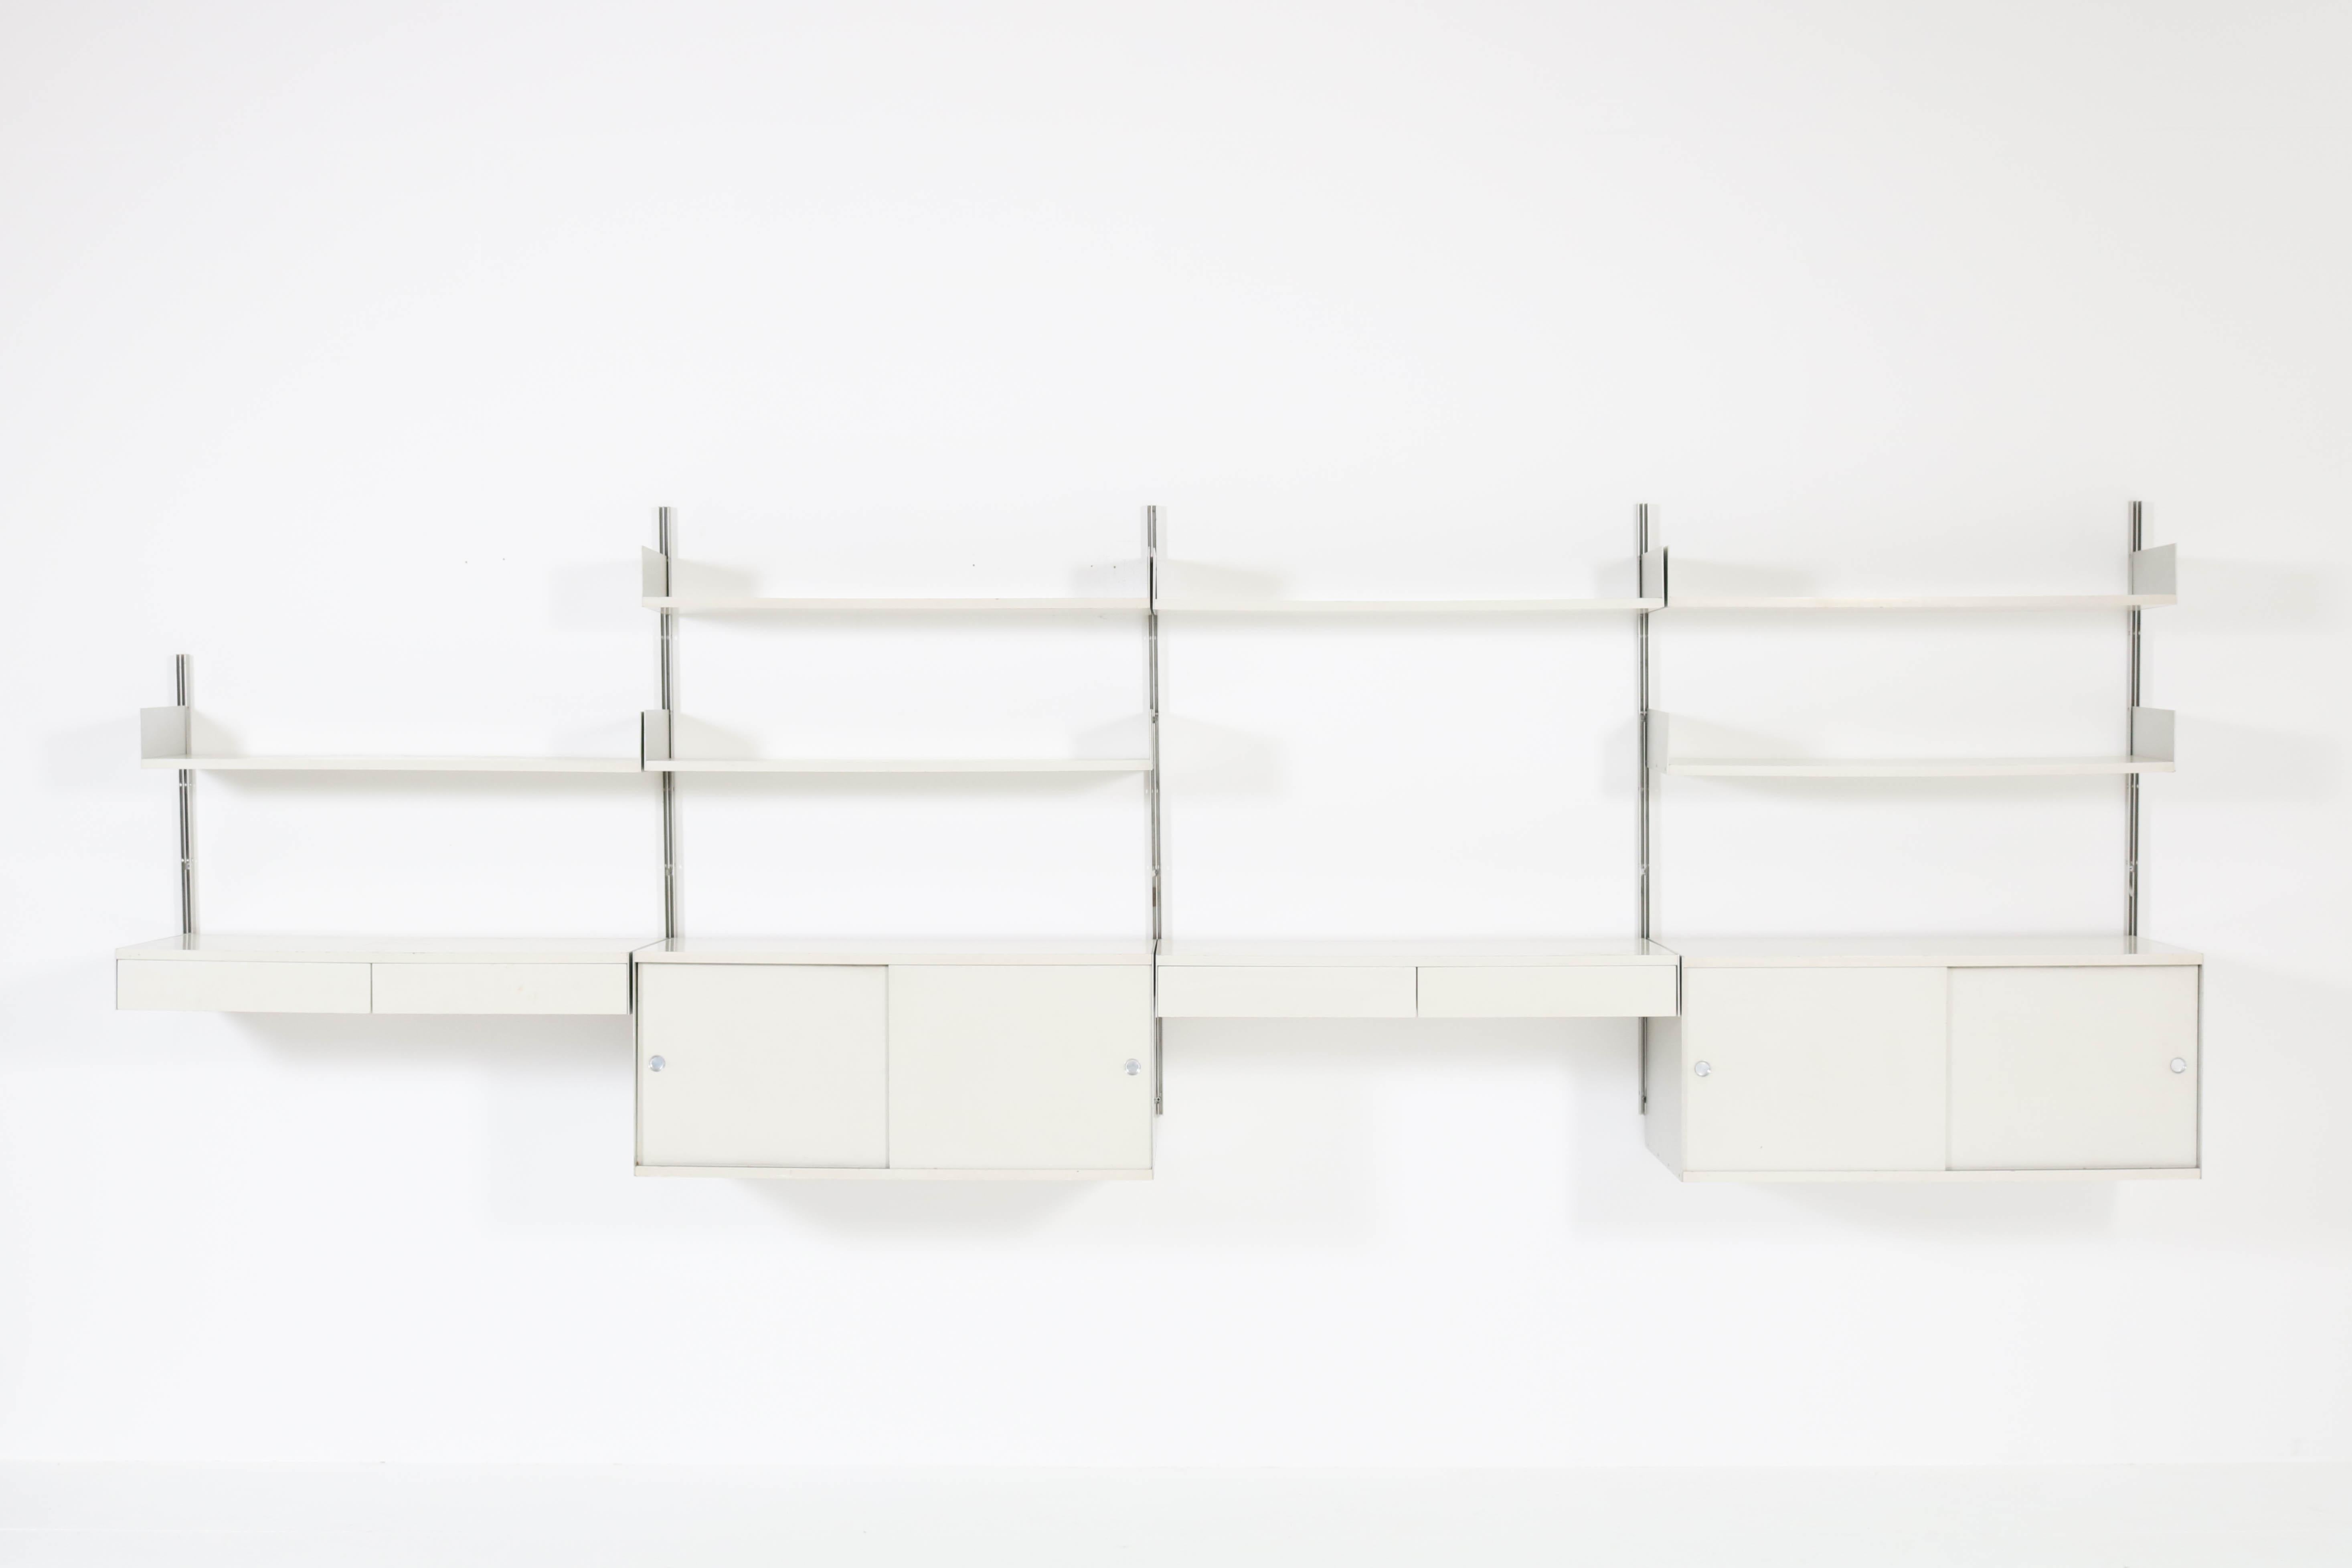 Wonderful and elegant Mid-Century Modern modular wall shelving unit.
Design by Dieter Rams for Vitsoe.
Striking German design from the 1960s.
Aluminum with lacquered plywood.
In good original condition with minor wear consistent with age and